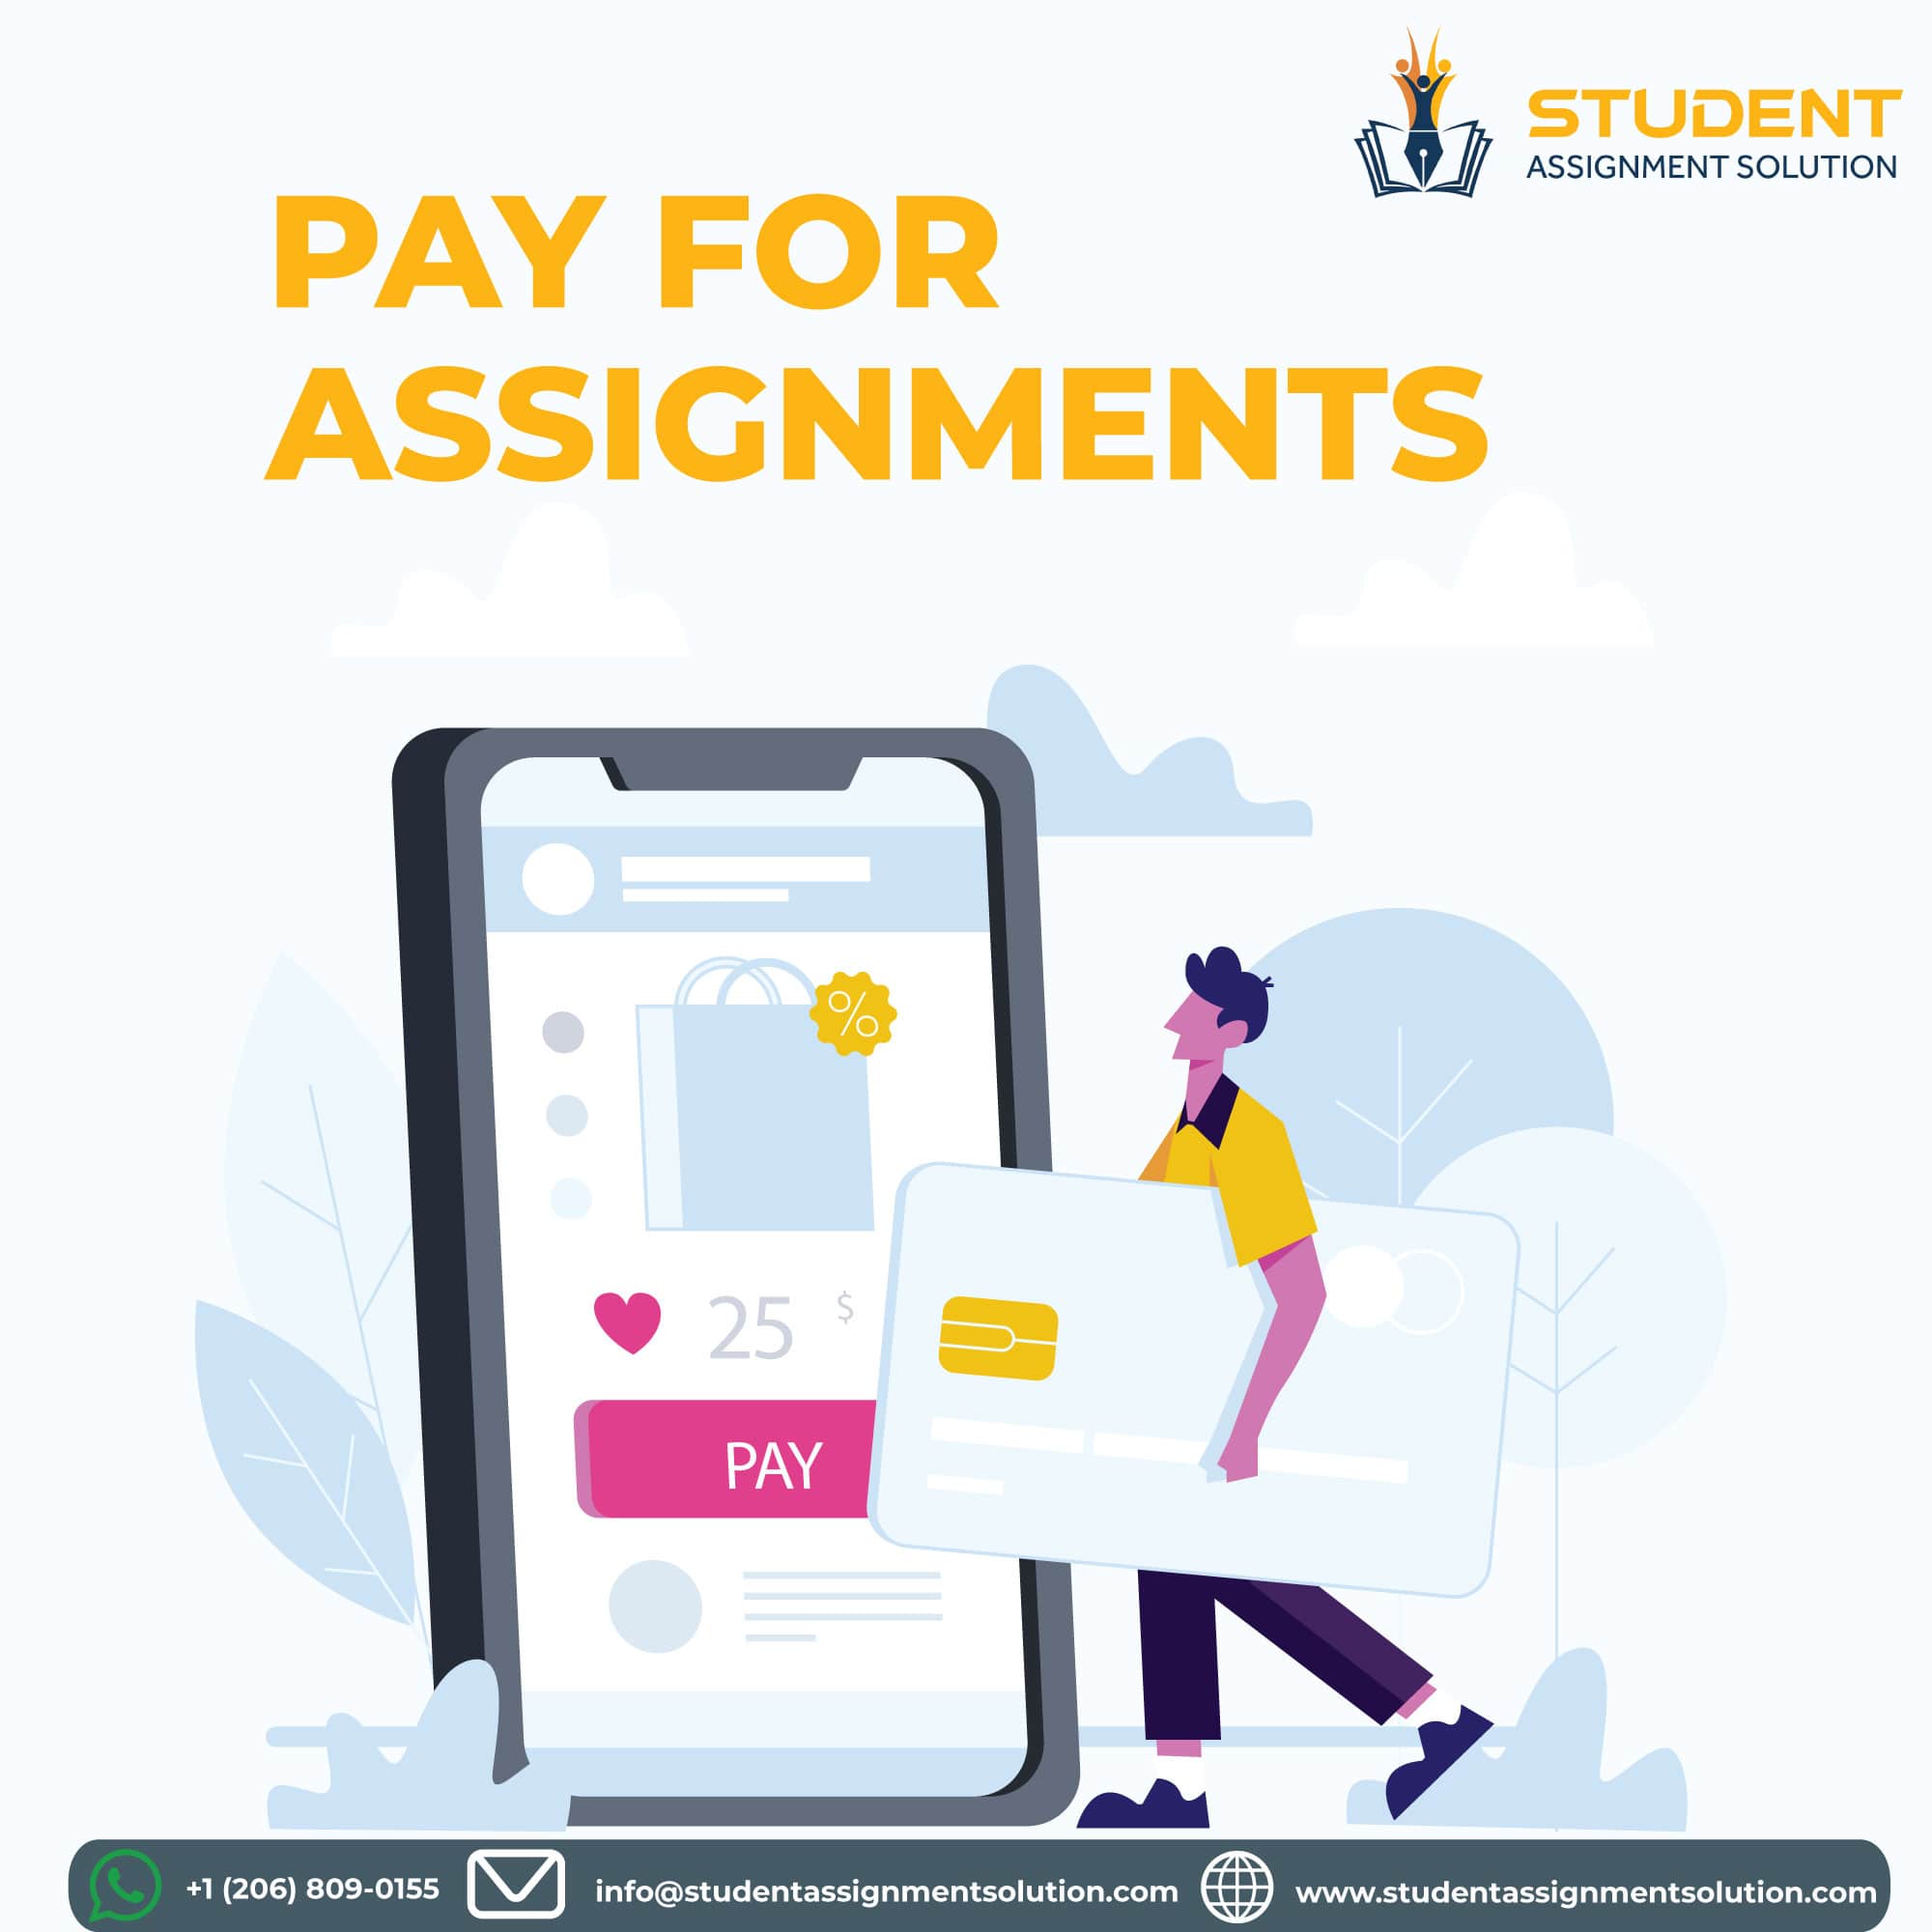 pay for assignments australia